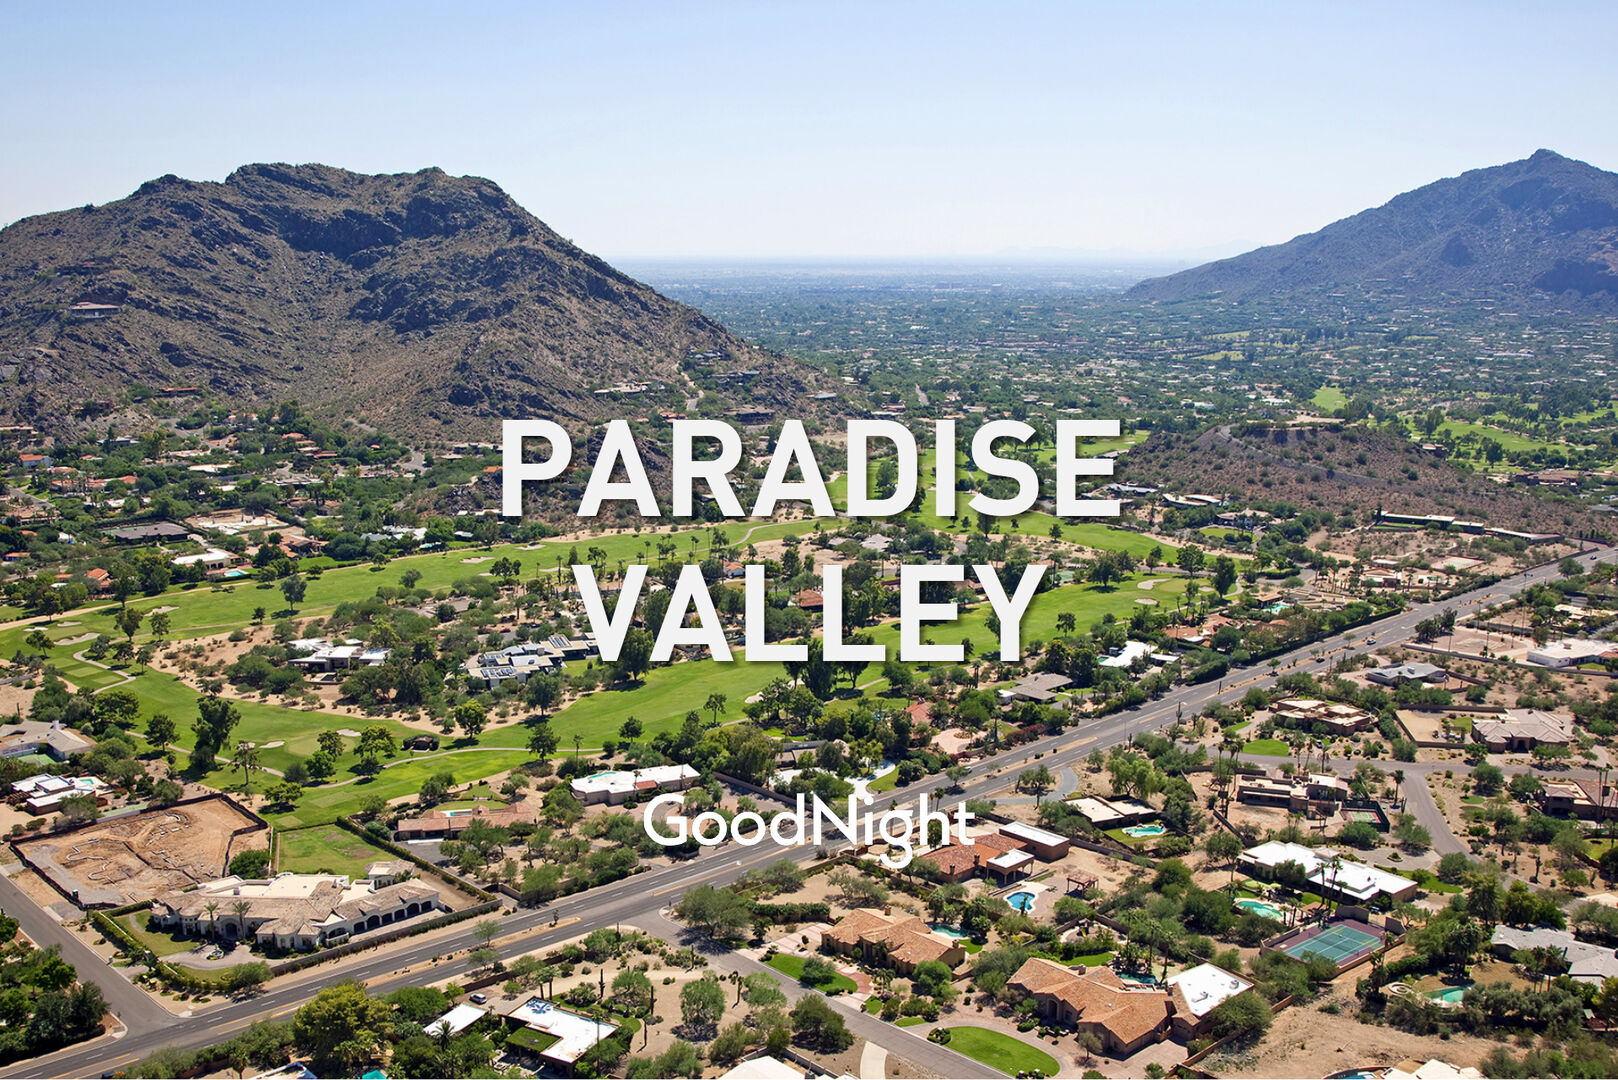 20 mins to Paradise Valley